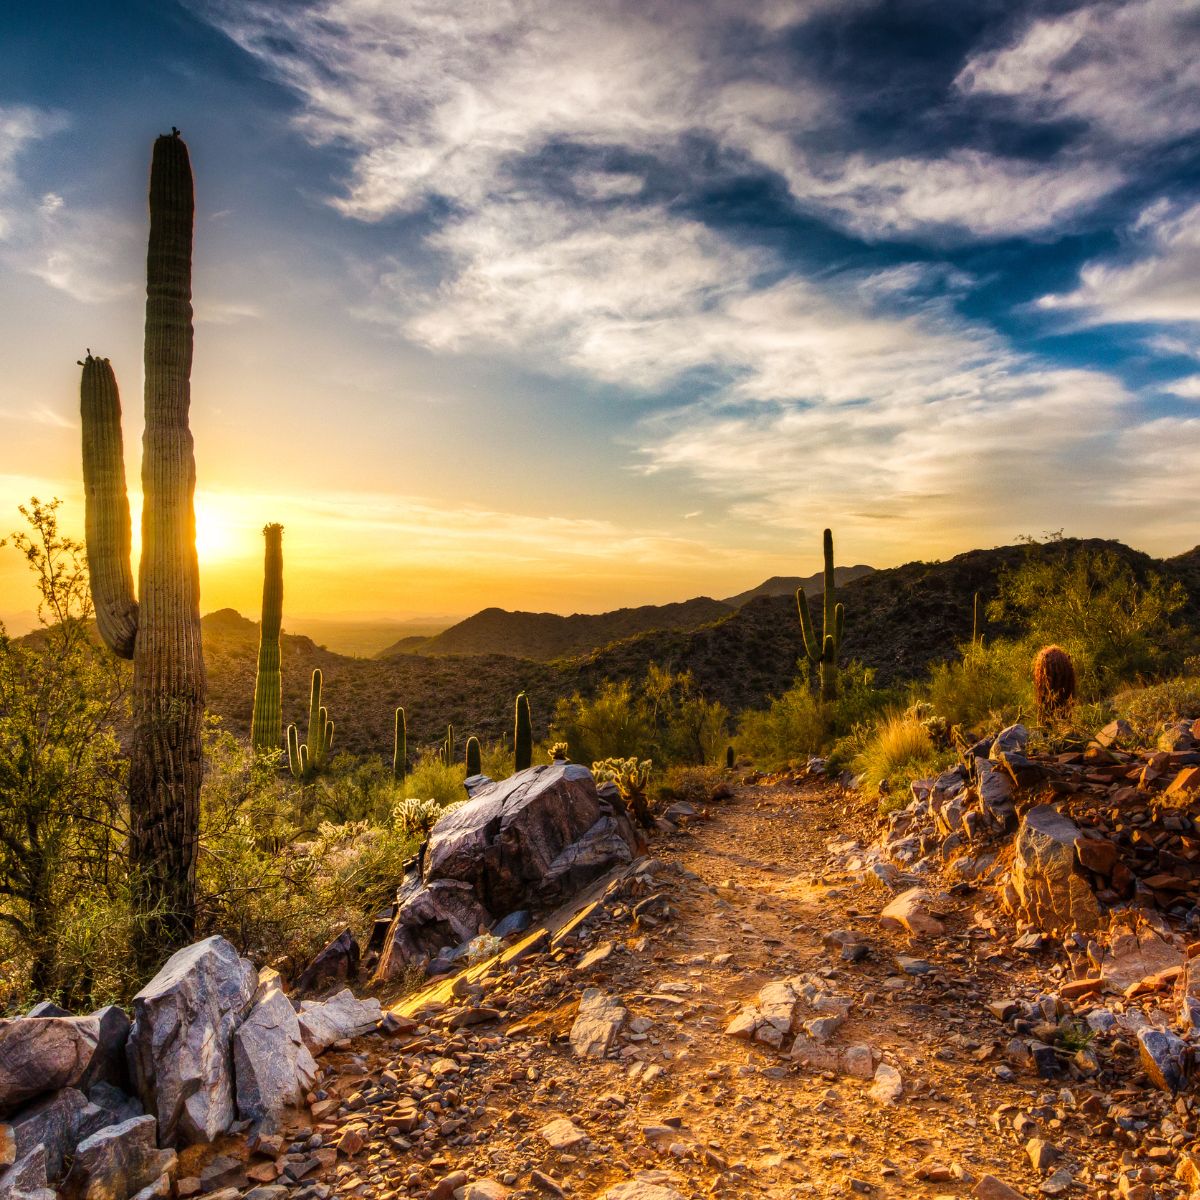 A beautiful sunset over Arizona's wilderness, a path, and some cacti. 